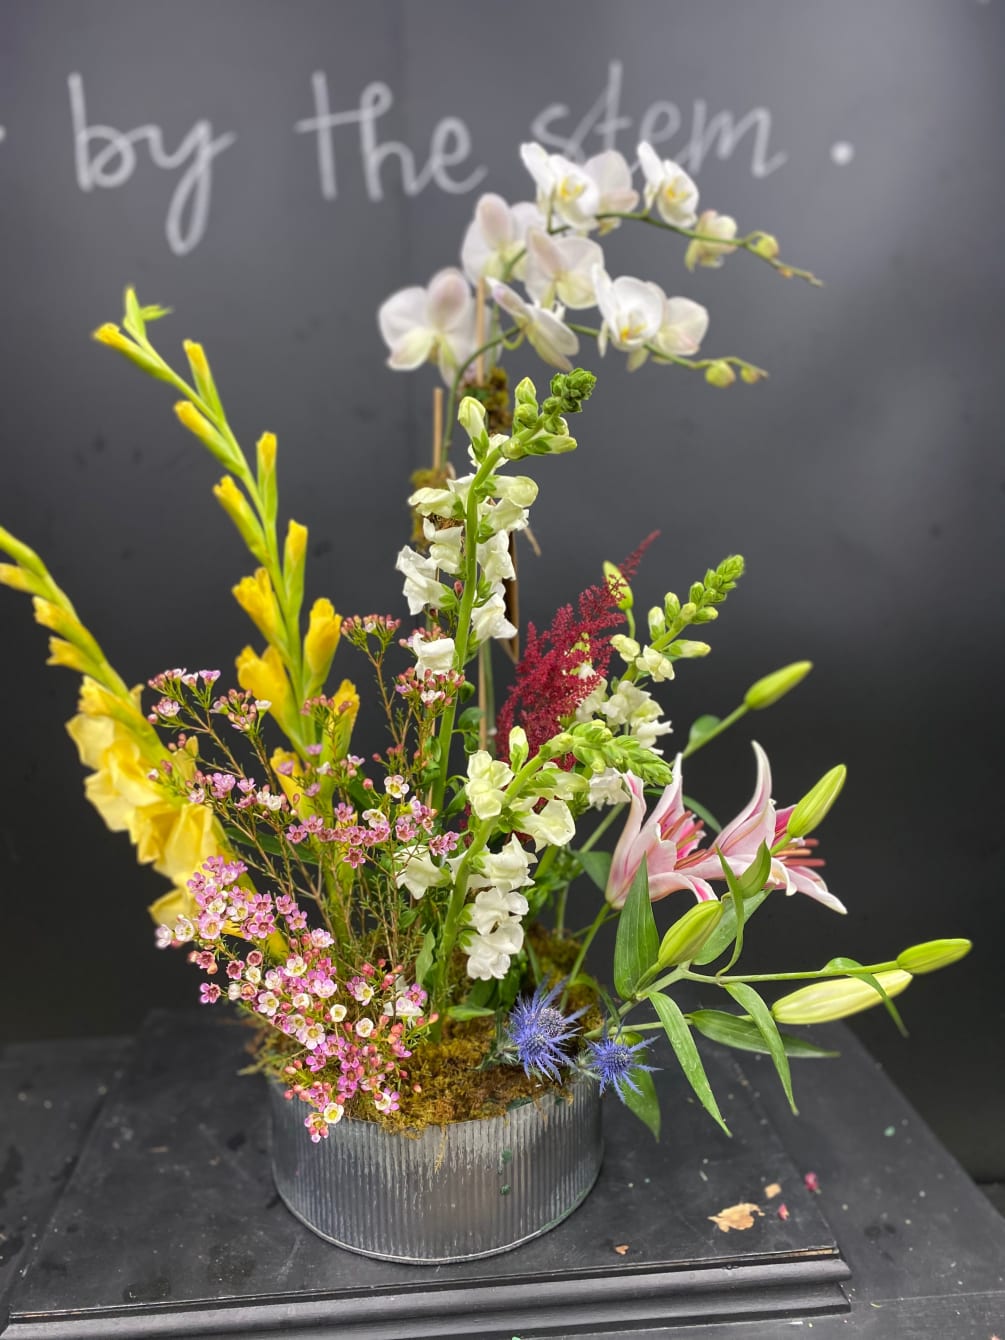 Beautiful spring flowers accompany a double stem white Phalaenopsis orchid in this